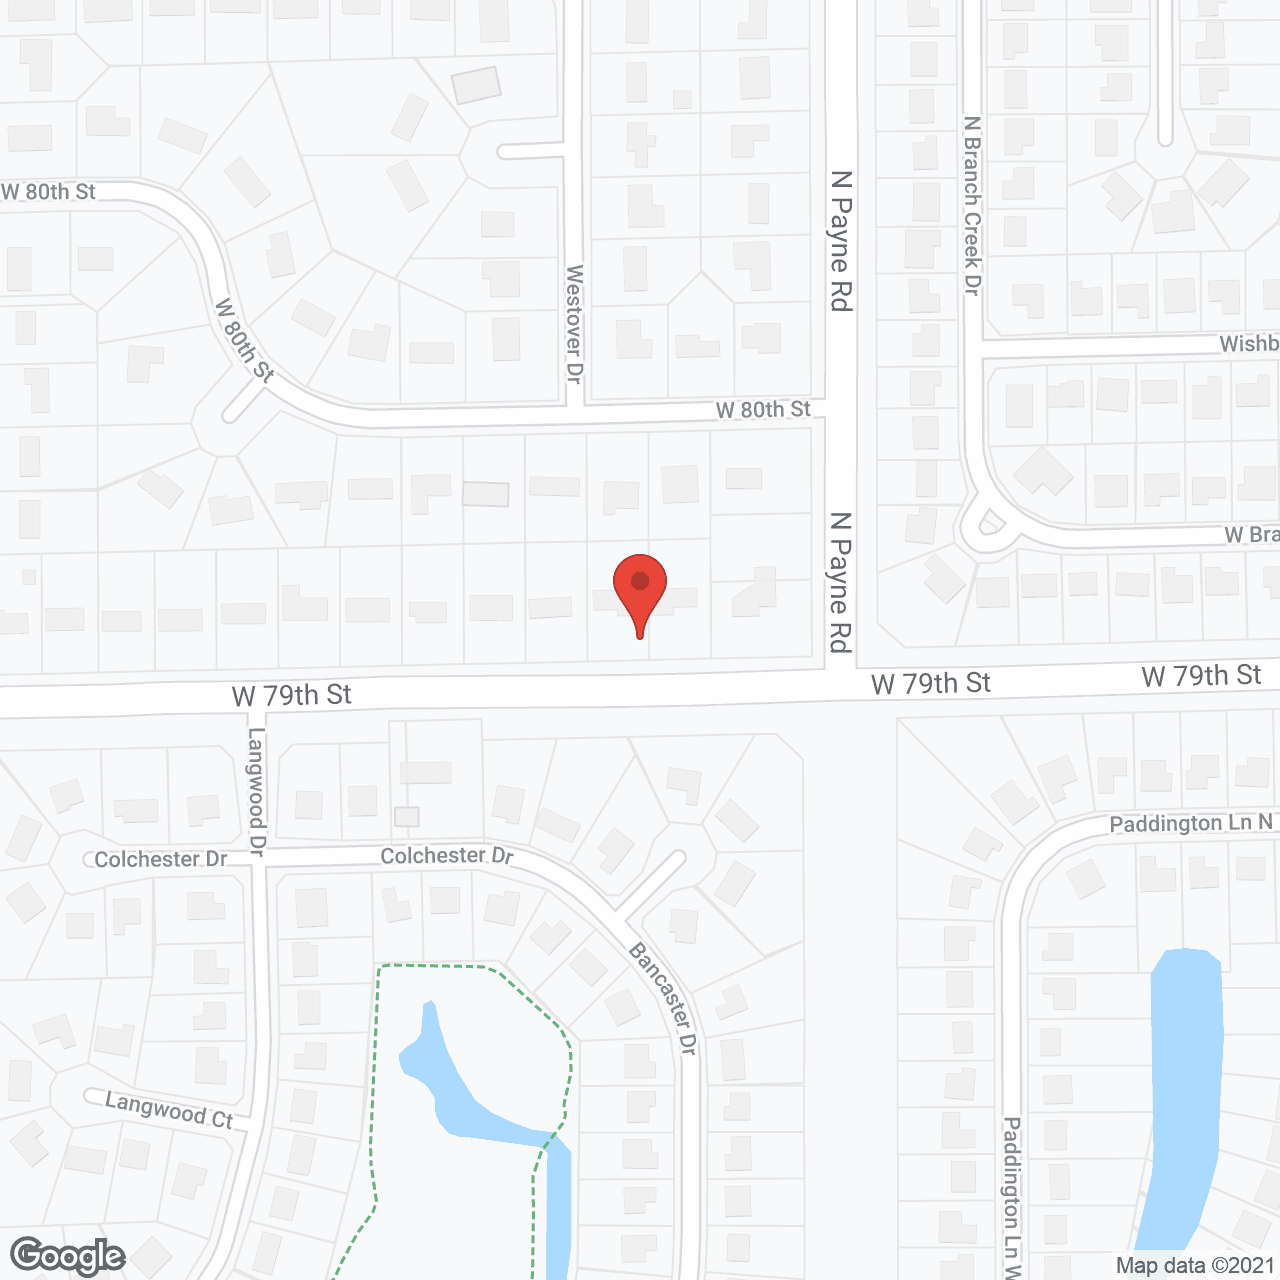 Independent Adult Day Care Centers - Indianapolis Northwest in google map